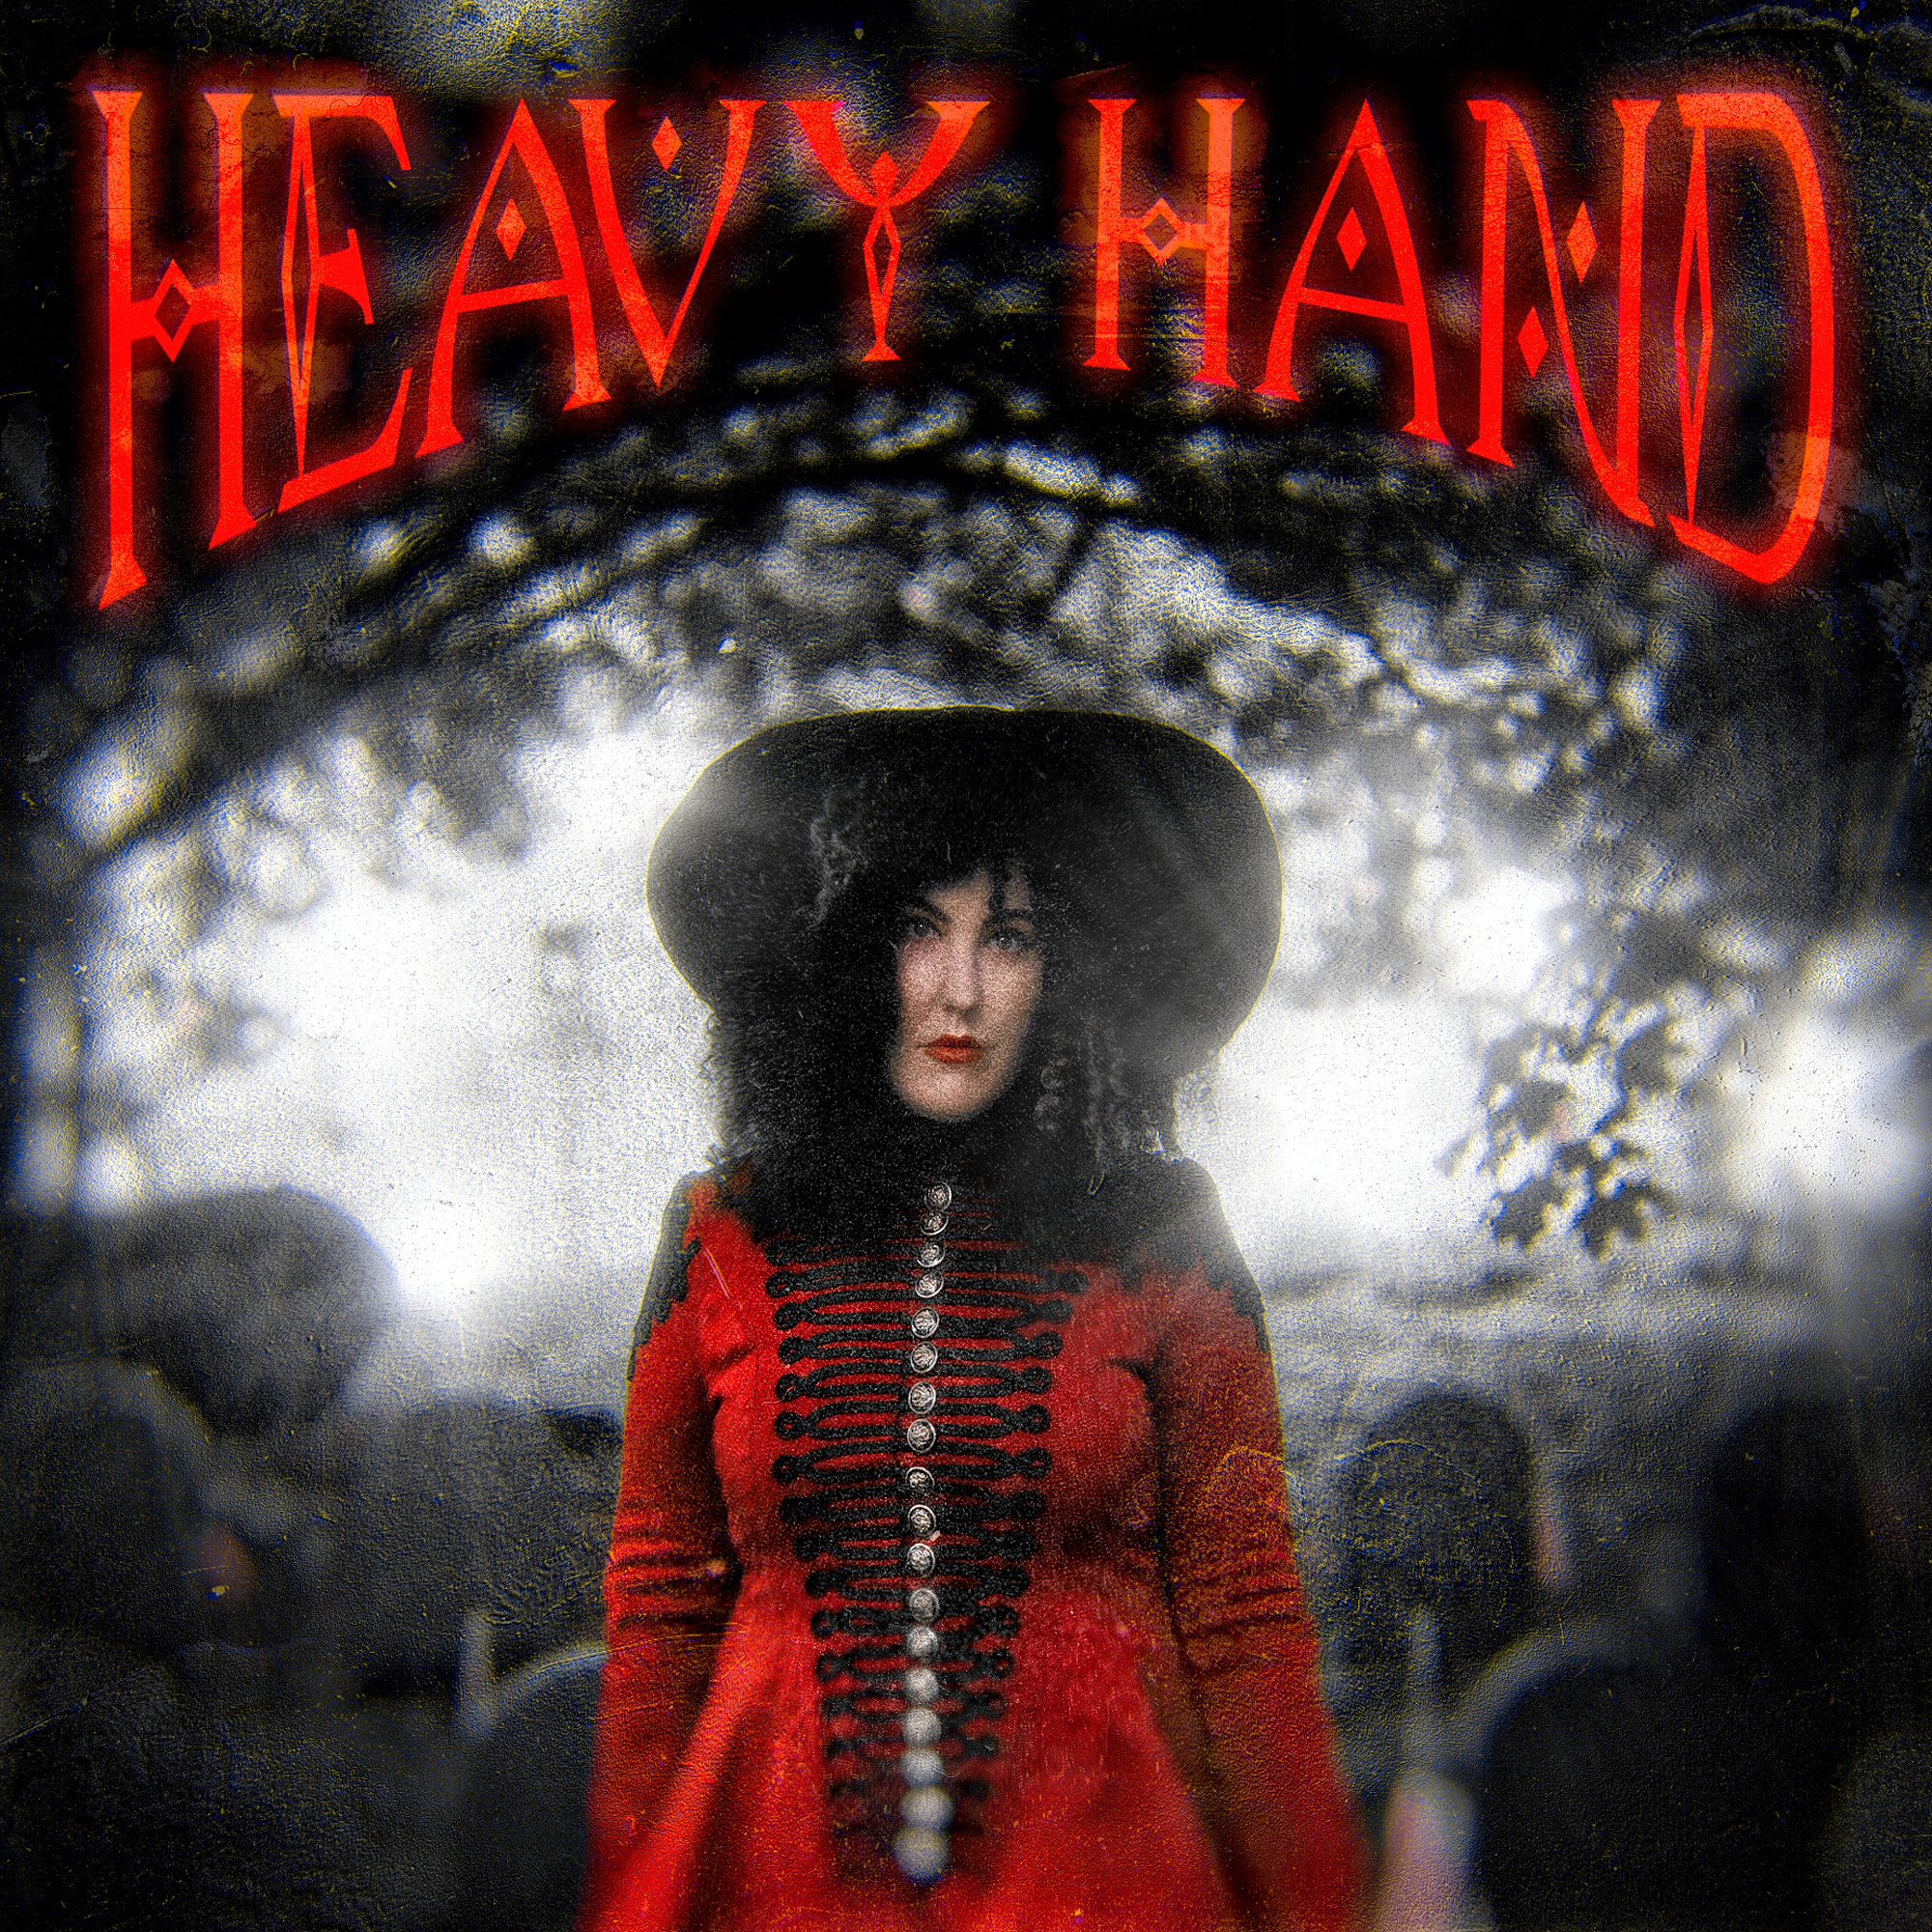 With haunting, melancholic vocals that soar over dark melodies concerning death, love, heaven and hell, ‘Anne Bennett’ releases ‘Heavy Hand’